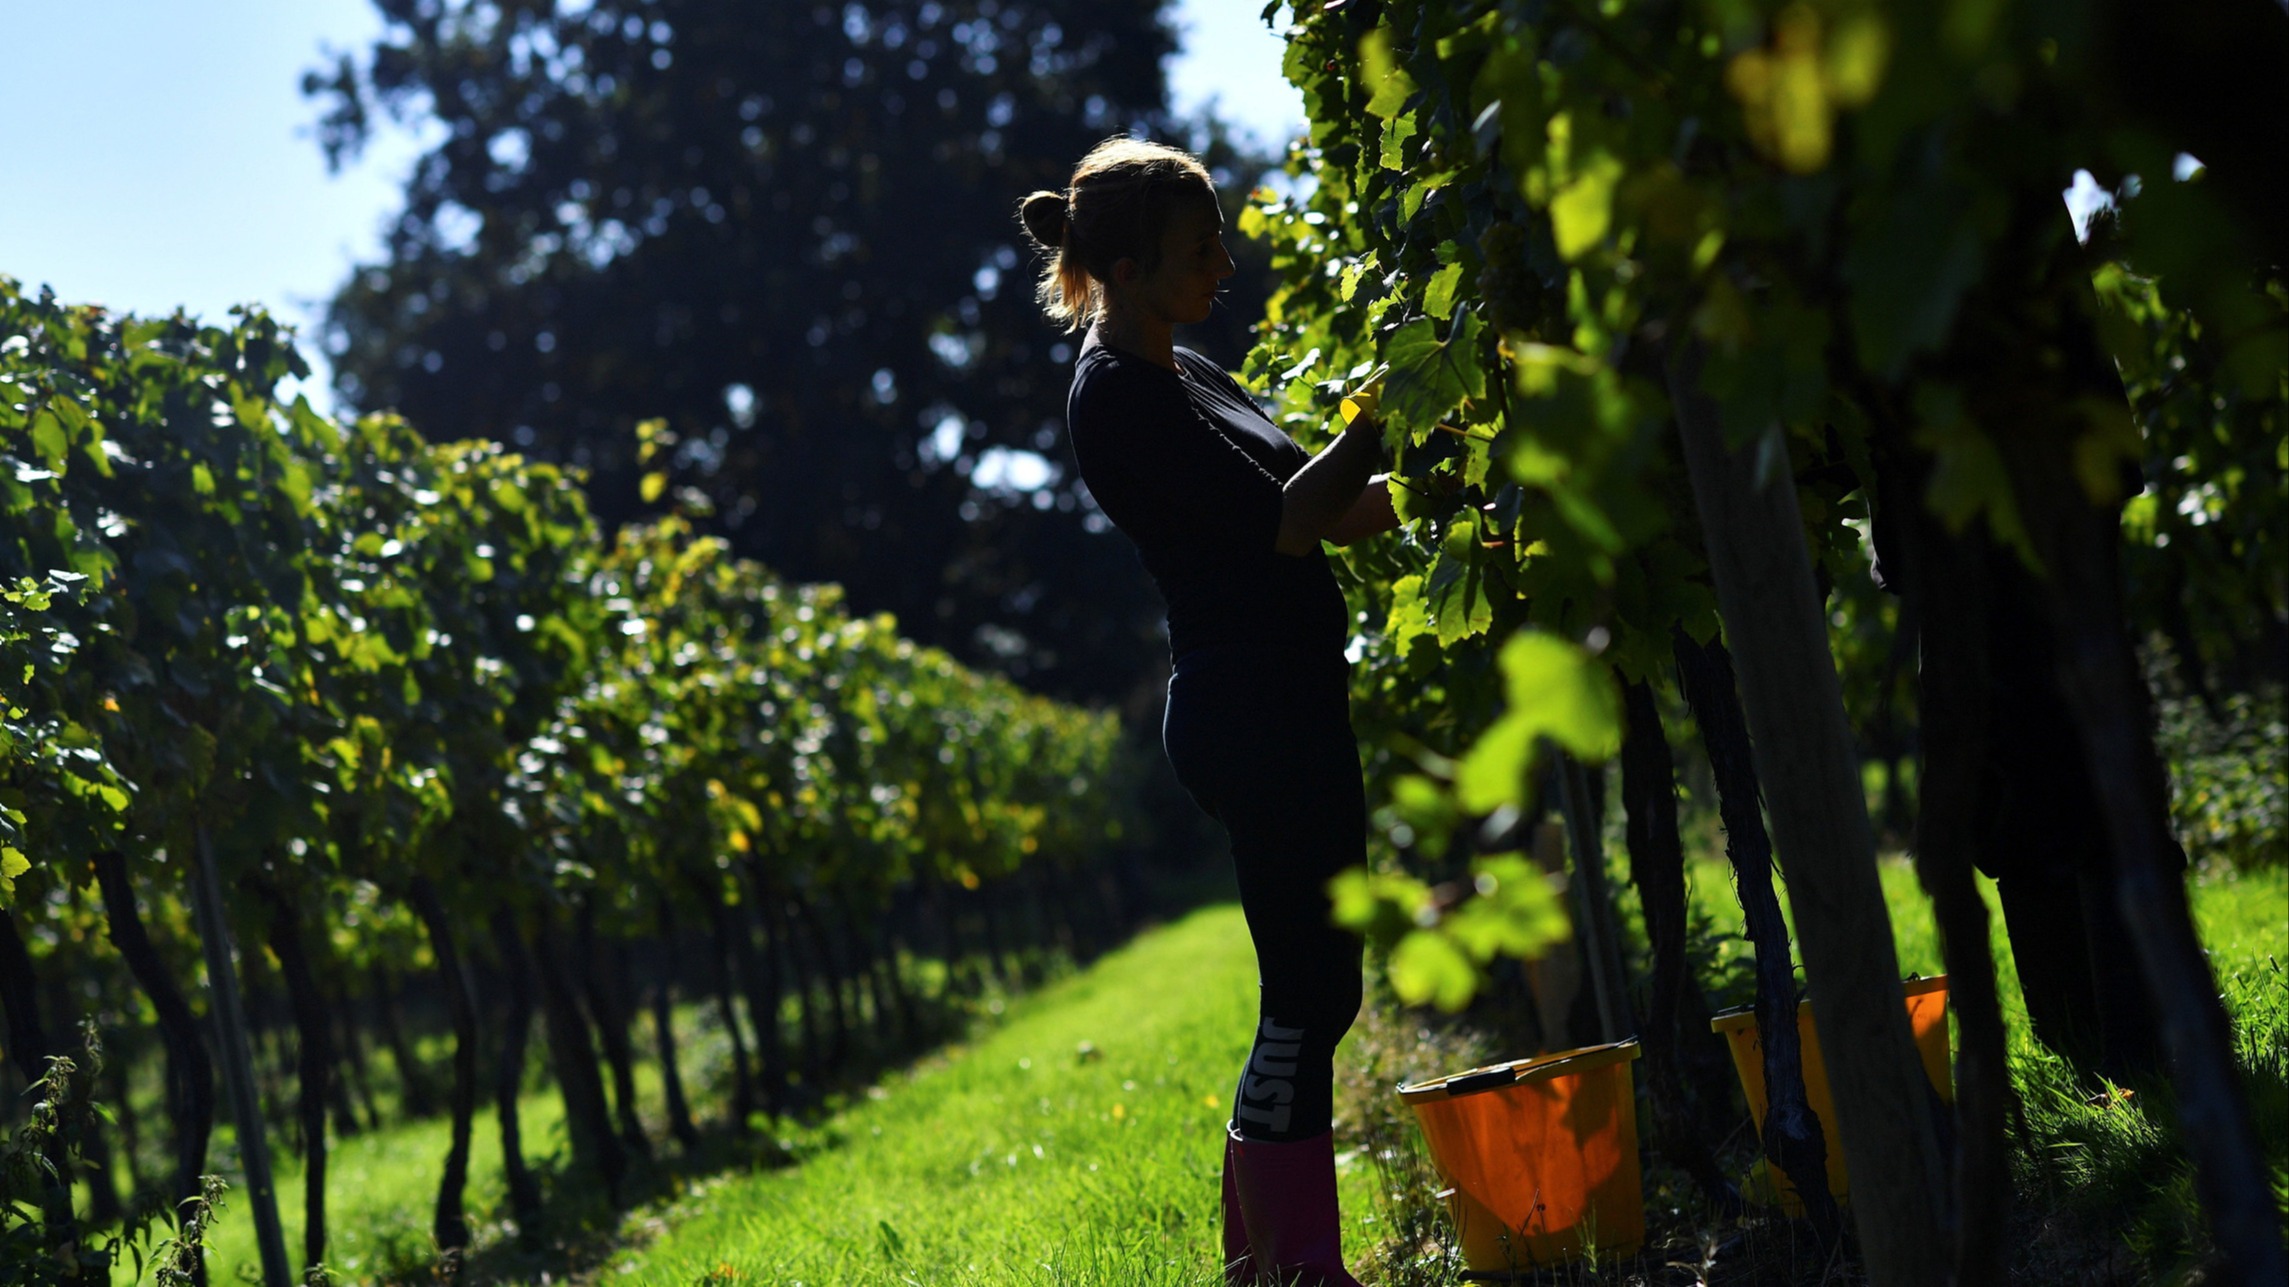 ft.com - English bubbly: toastier weather should cheer local wineries